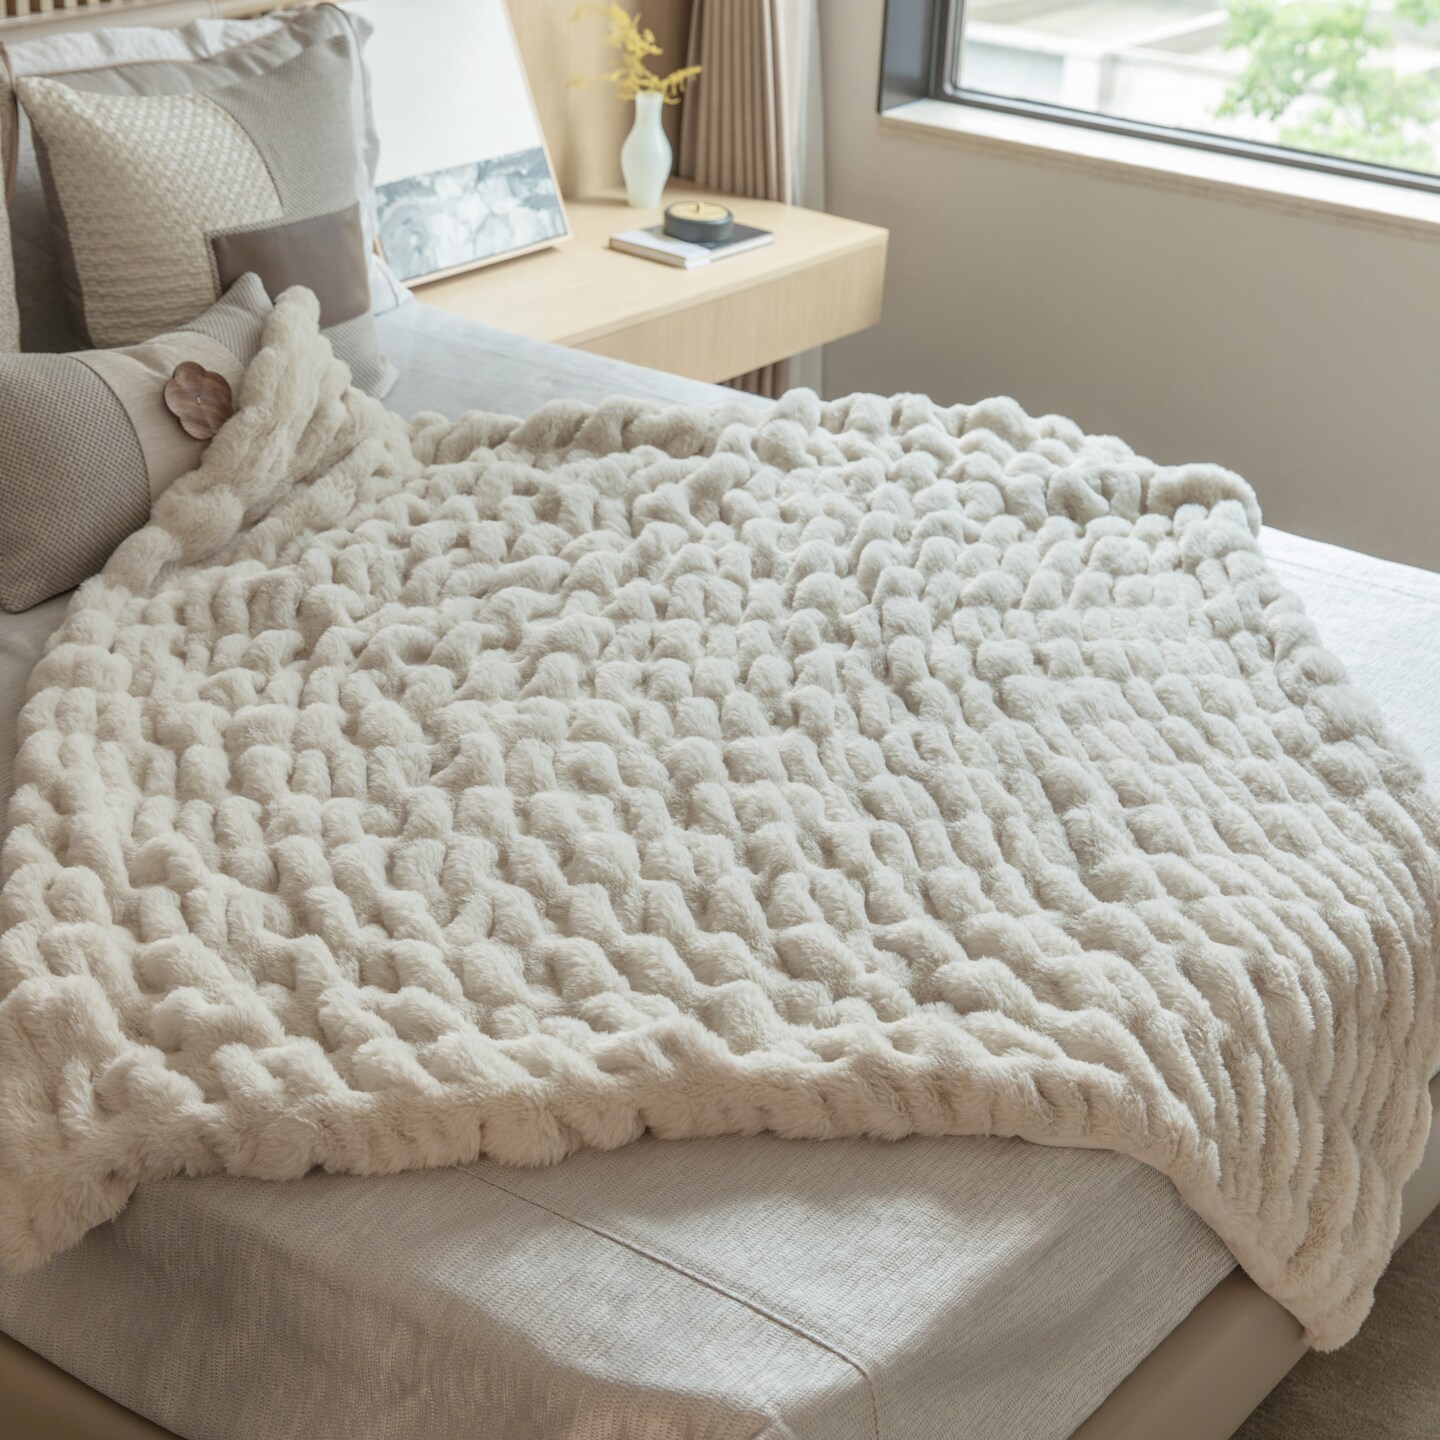 Luxurious 50 in. x 60 in. Rached Faux Fur Cozy Throw Blanket - Decorative  Plush Blanket for Sofa and Bed, Soft and Comfortable Home Accent, Stylish